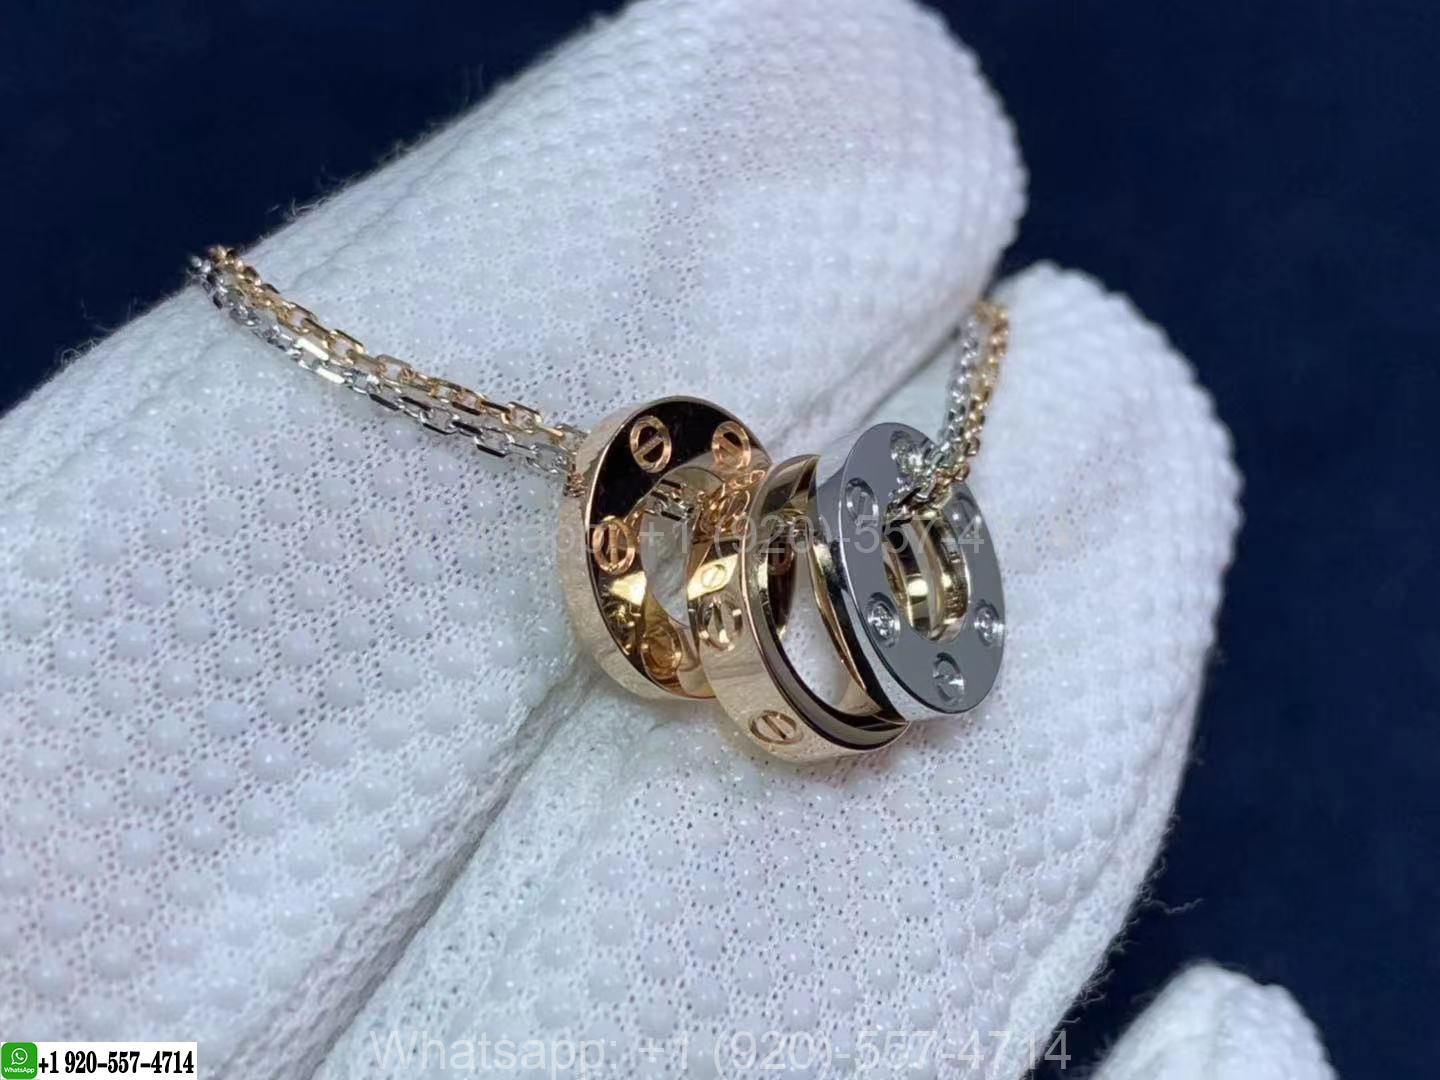 Cartier Love Necklace With 6 Diamonds Rose Gold/White Gold